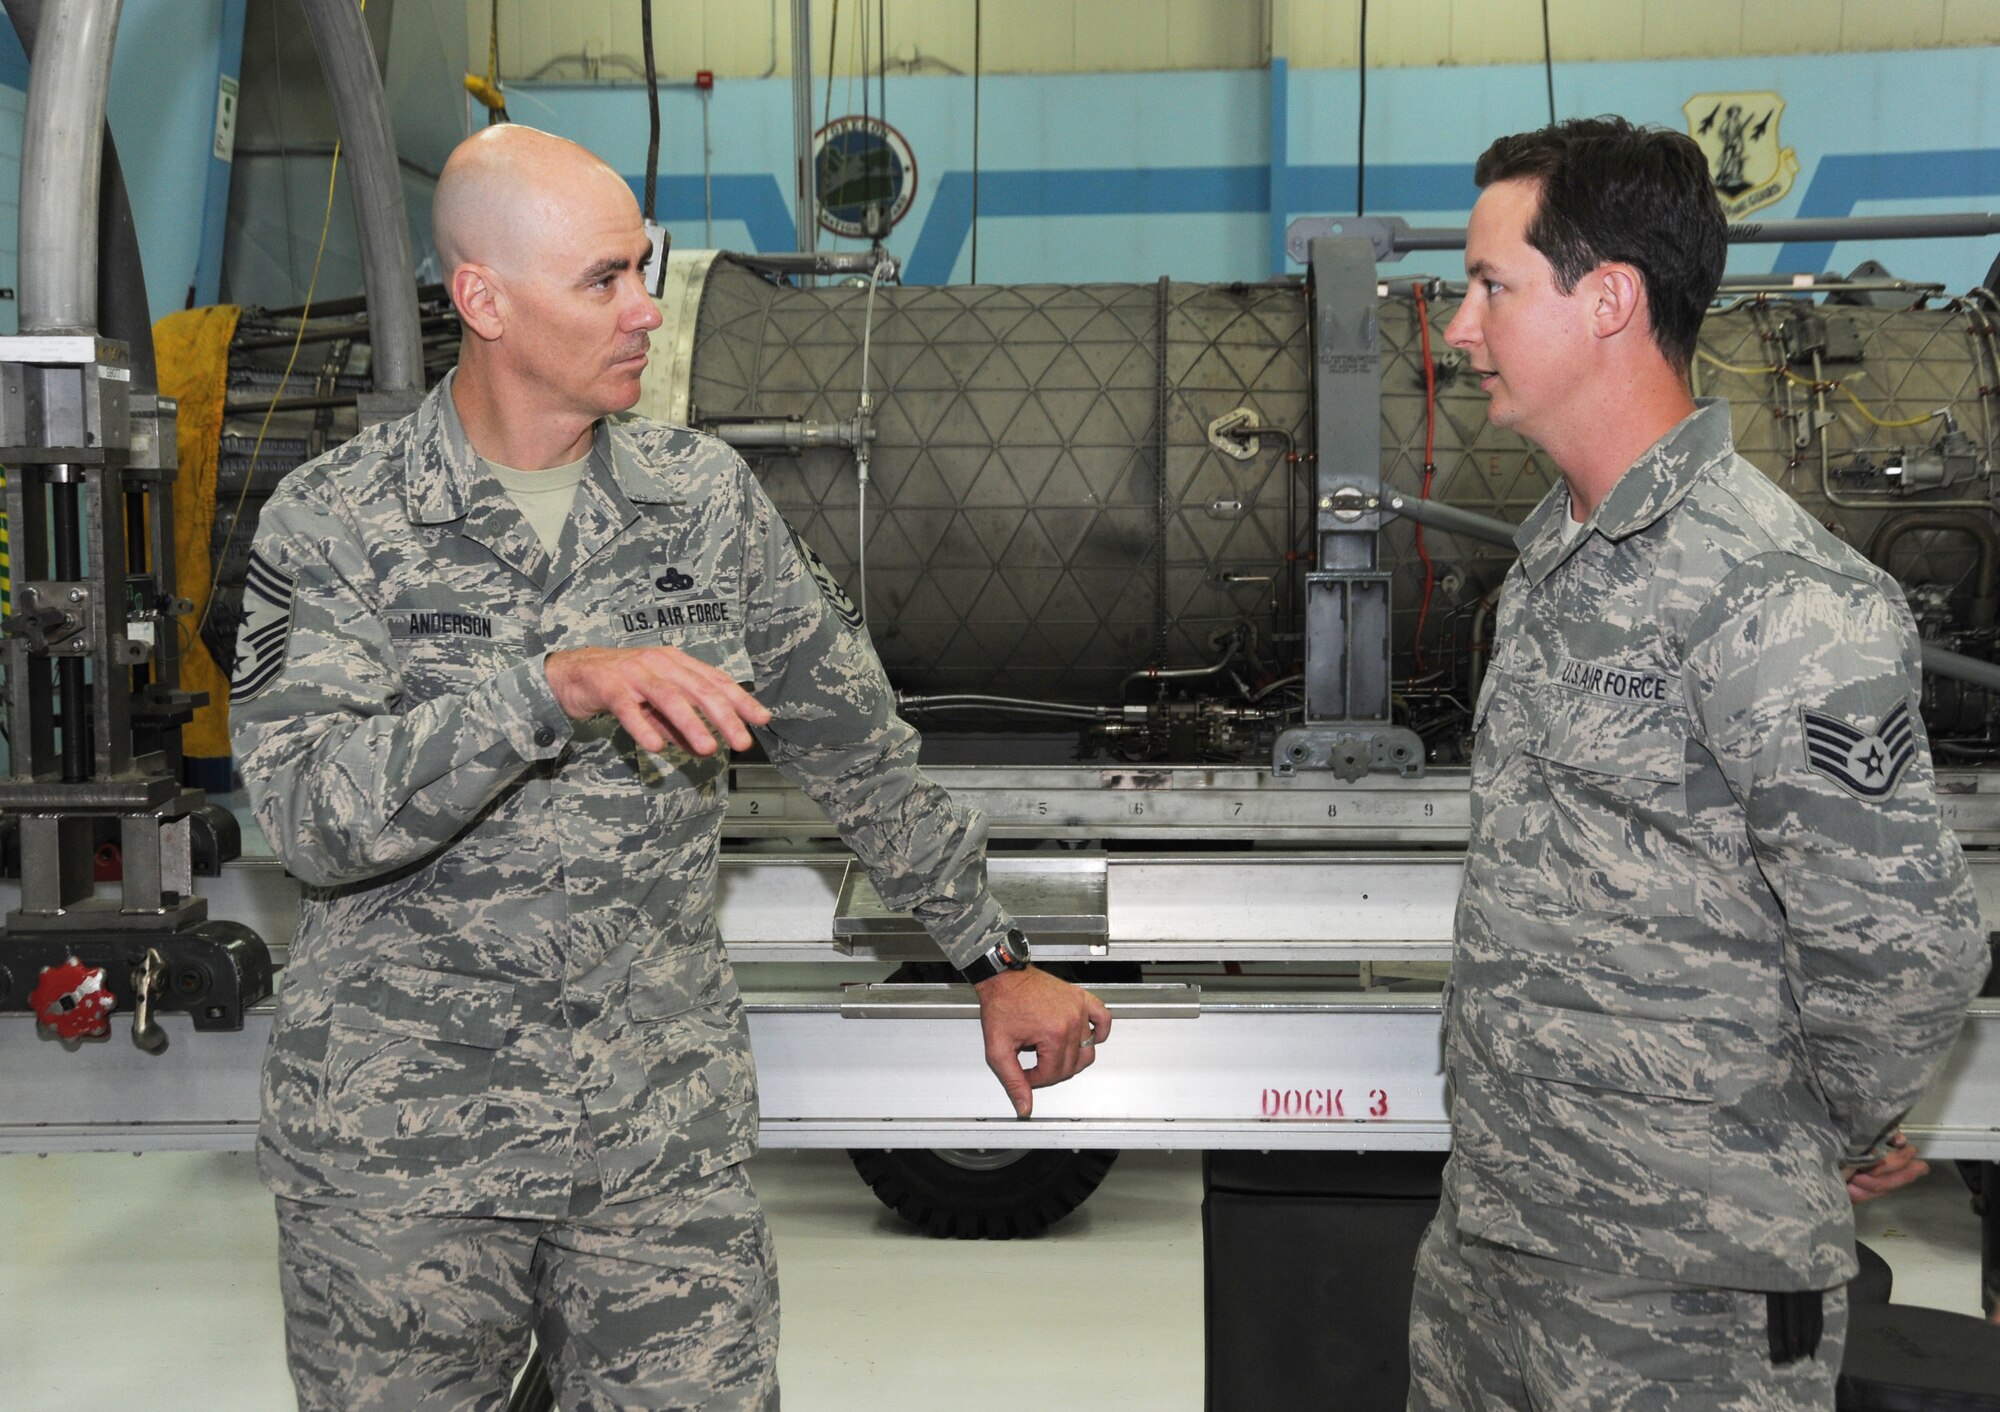 Ronald C. Anderson Jr., Command Chief Master Sgt., 1st Air Force, left, talks with Staff Sgt. Allen, 142nd Fighter Wing Maintenance Group, right, during his tour of the Portland Air National Guard Base, Ore., June 10, 2014. (Air National Guard photo by Tech. Sgt. John Hughel, 142nd Fighter Wing Public Affairs/Released)